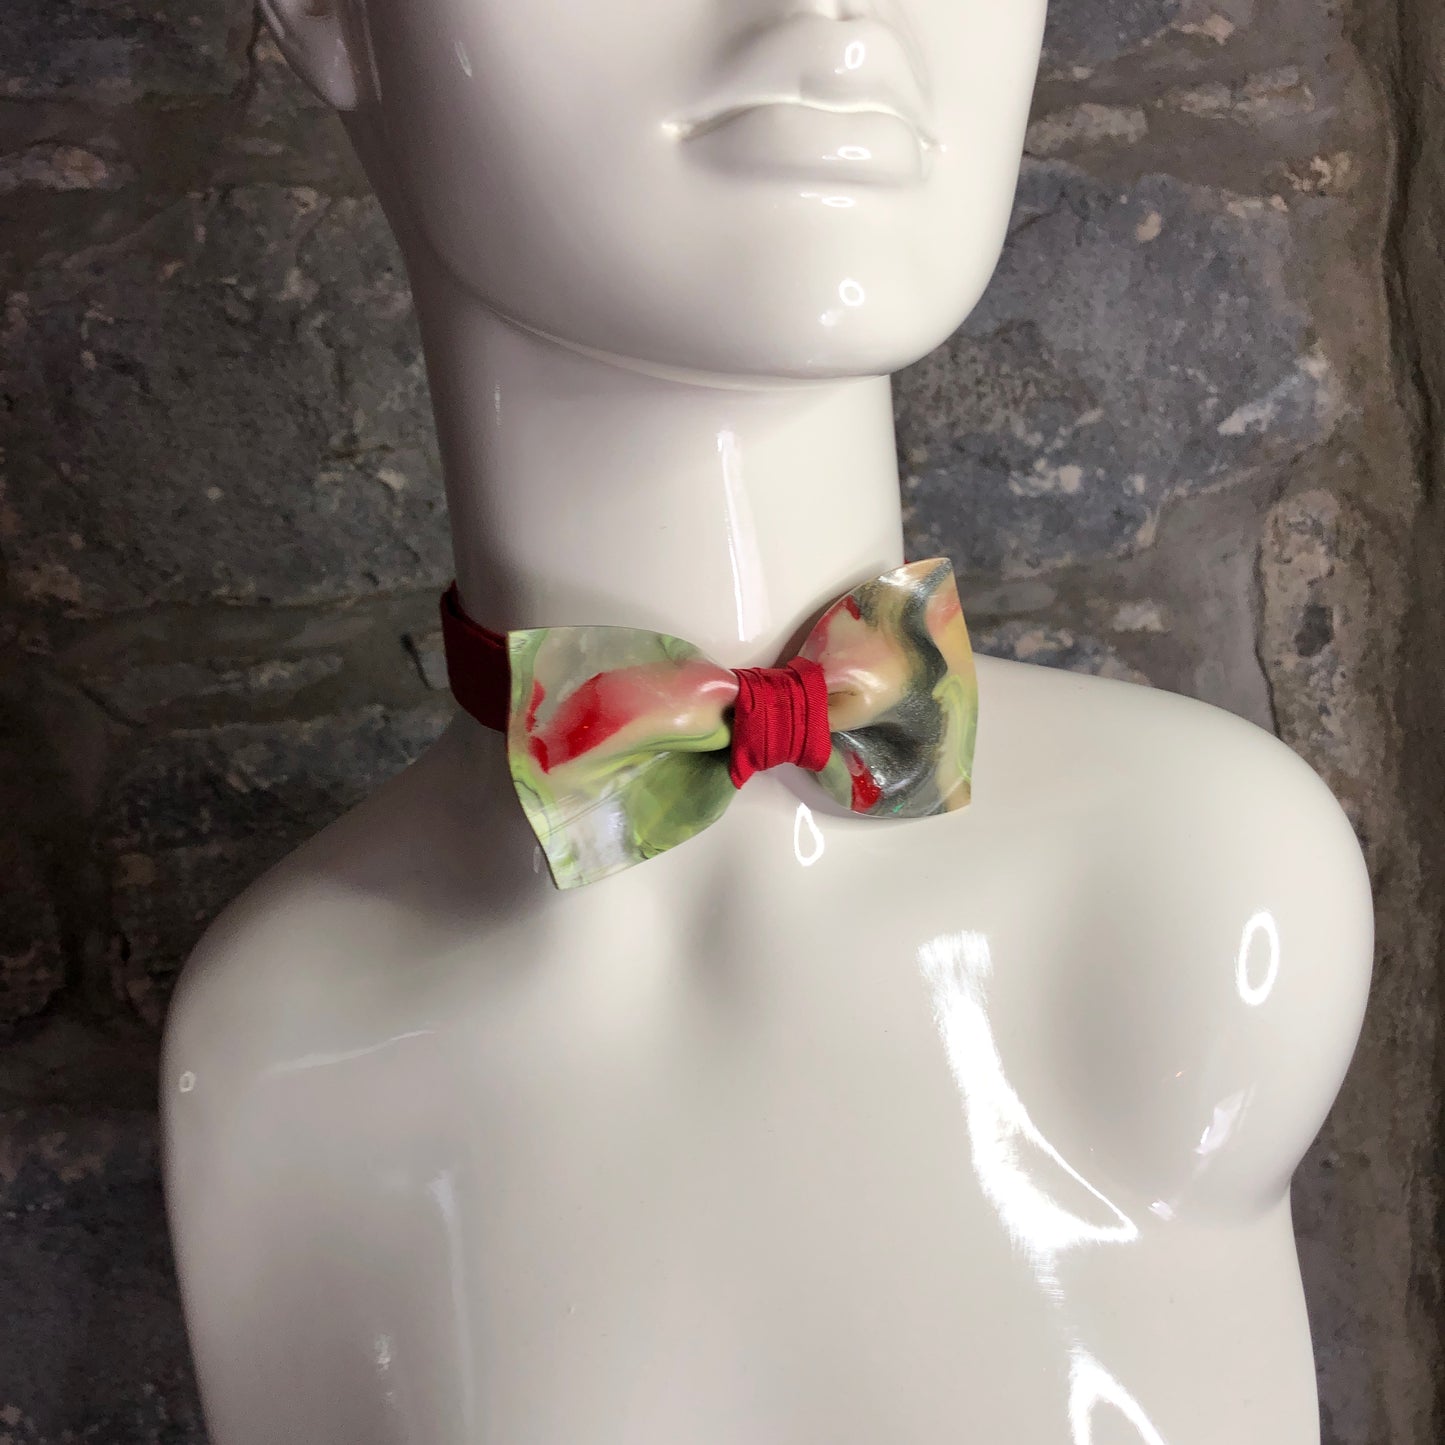 Sage "Glo!" Collection Bow Tie